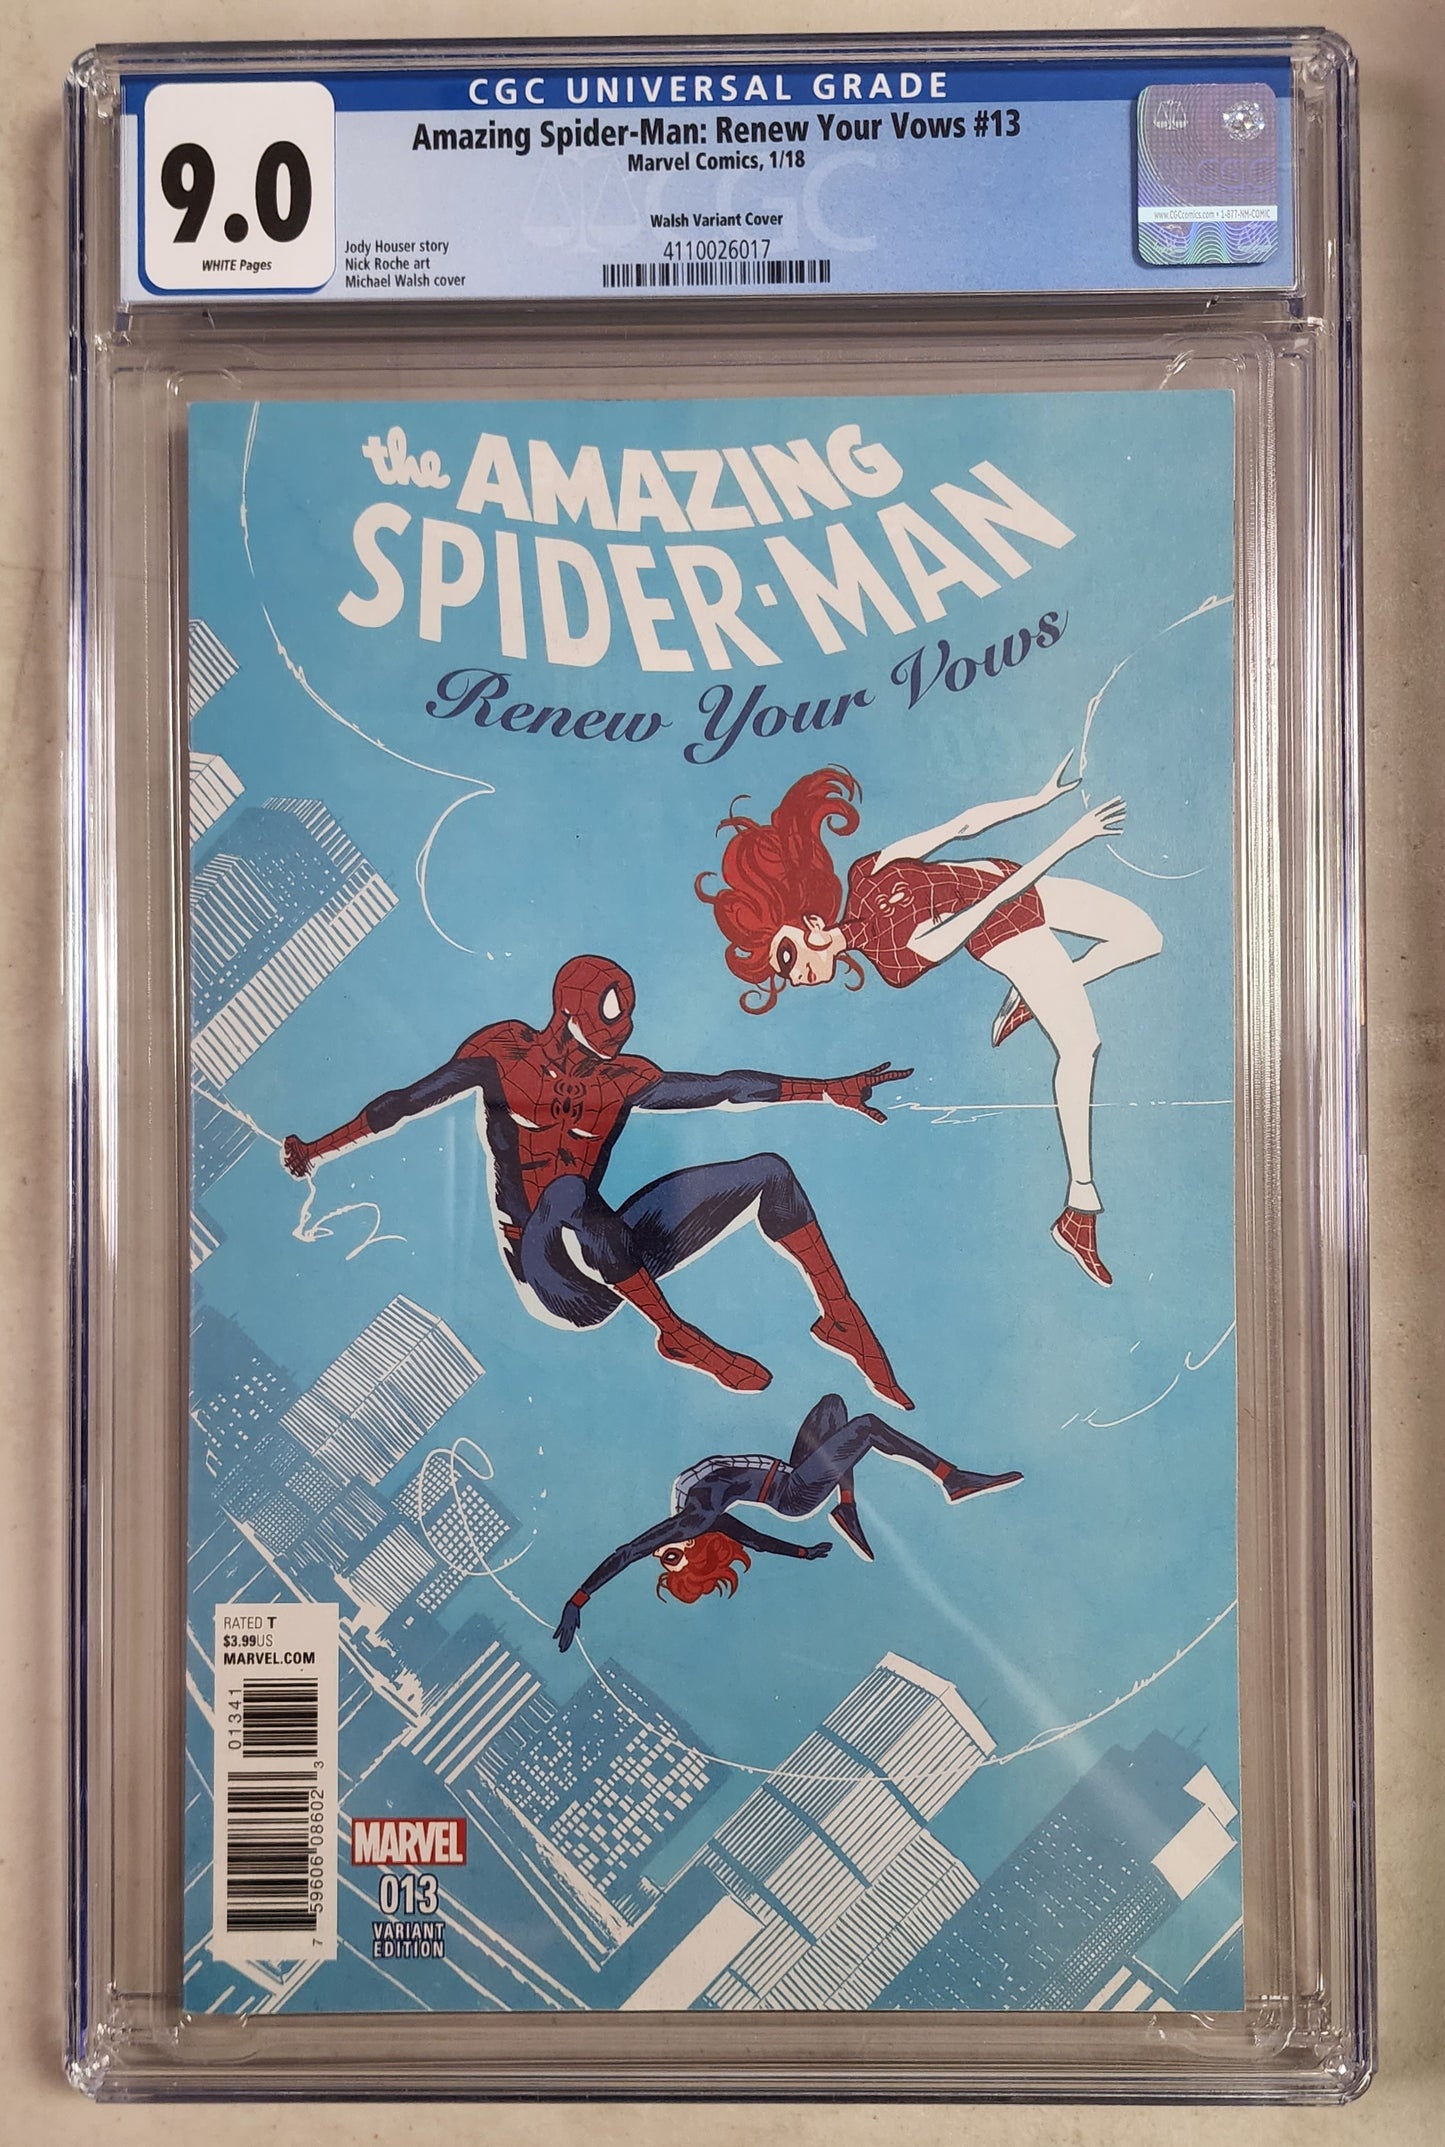 9.0 CGC AMAZING SPIDER-MAN RENEW YOUR VOWS #13 WALSH 1:25 VARIANT [4110026017]